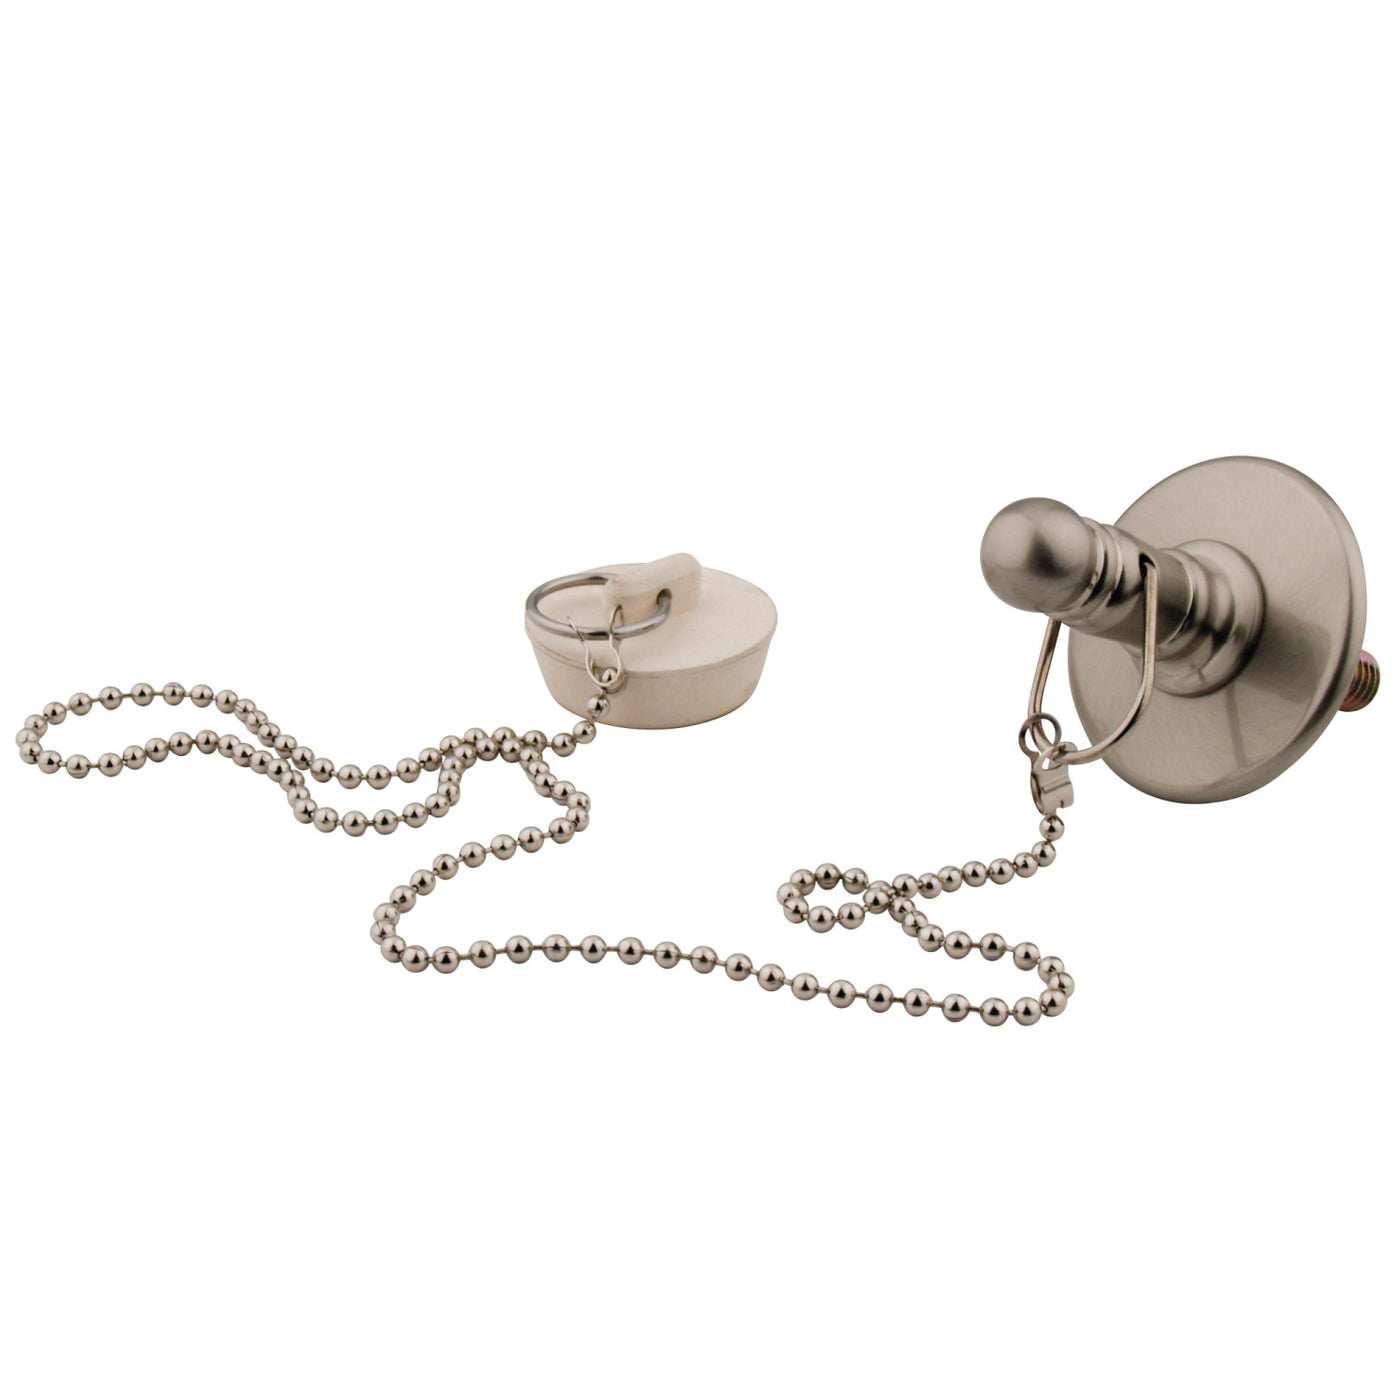 Elements of Design ED1118 Rubber Stopper Chain and Attachment for CC1008, Brushed Nickel